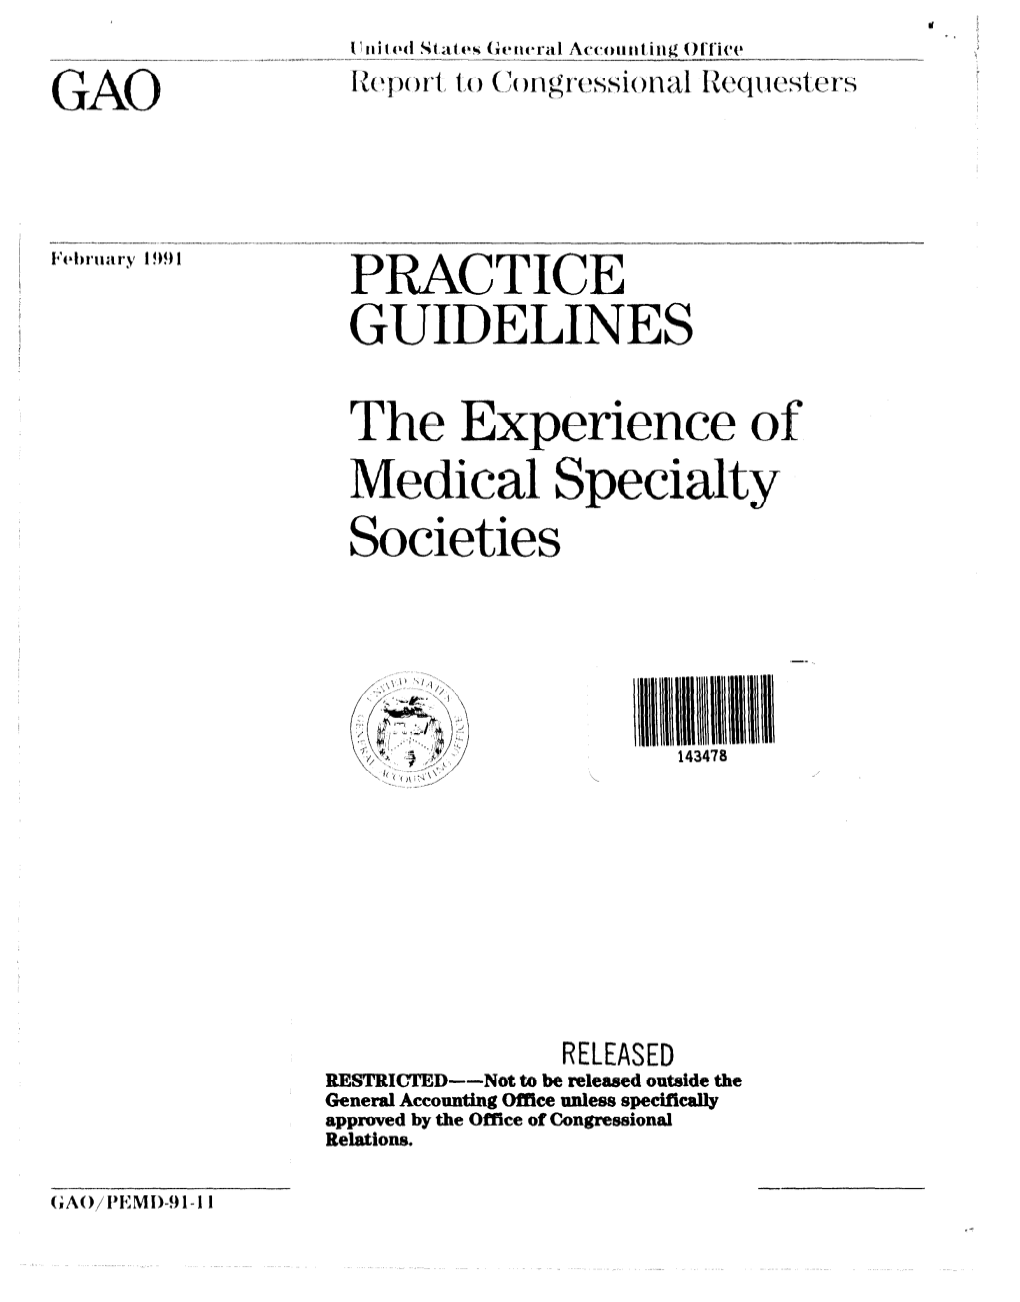 The Experience of Medical Specialty Societies That Have Developed Them